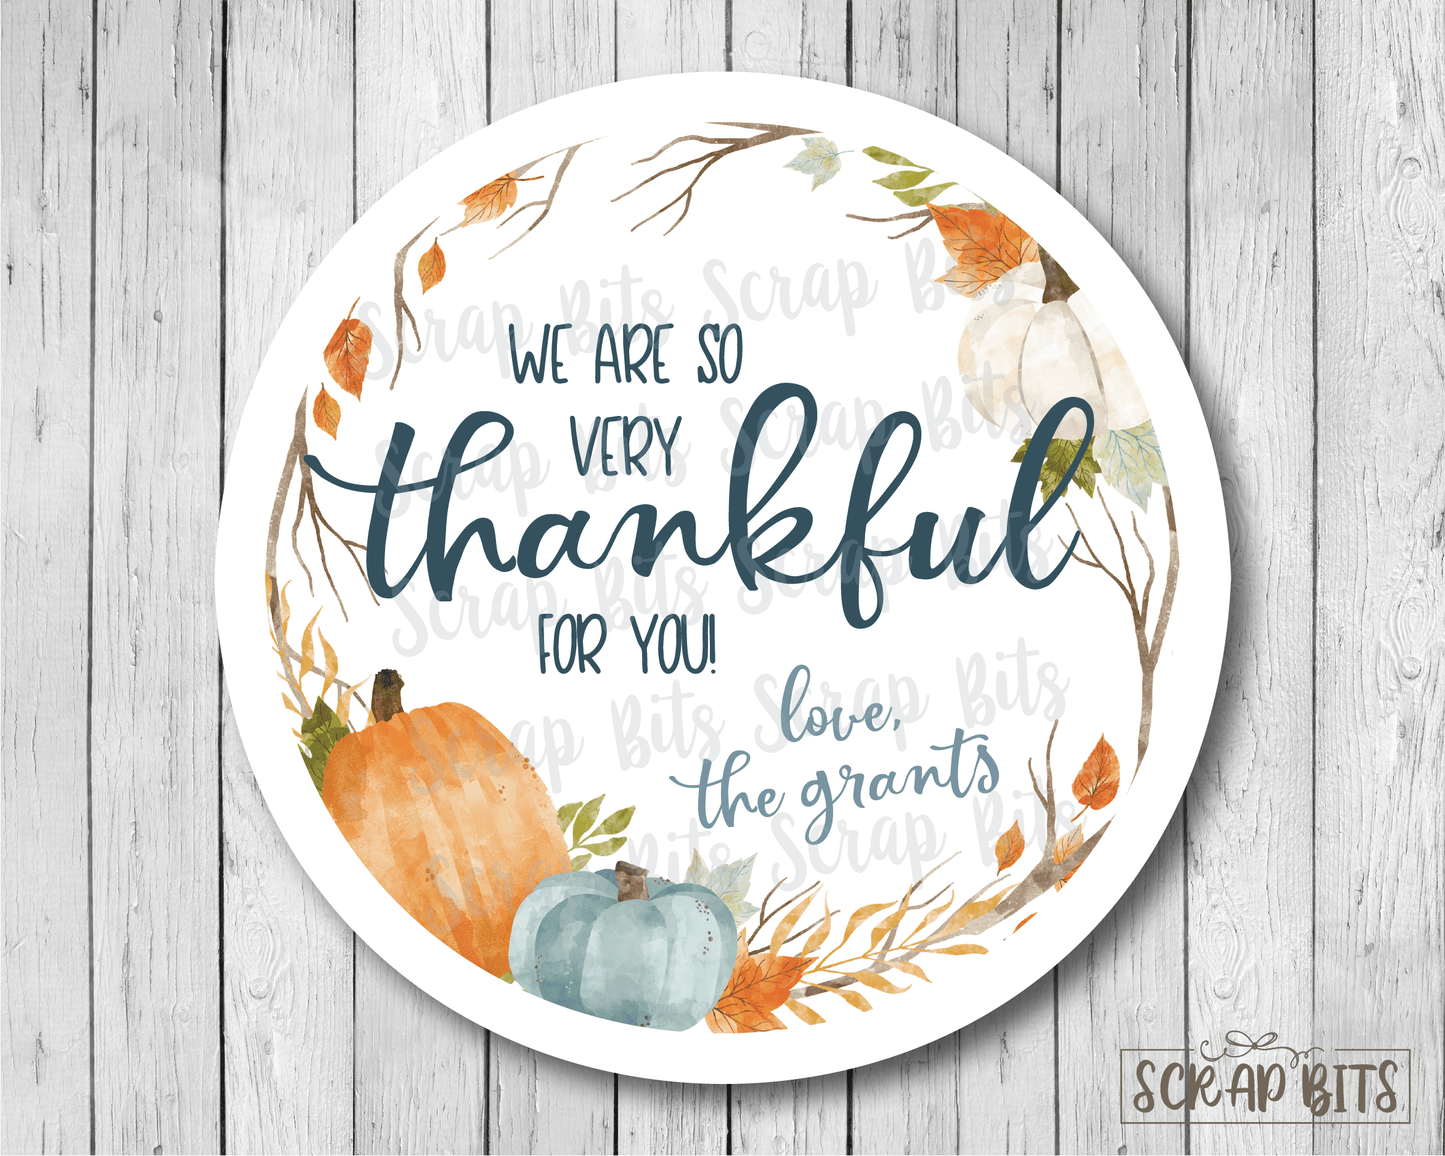 Thankful Pumpkin Wreath Stickers or Tags . Thanksgiving Stickers - Scrap Bits